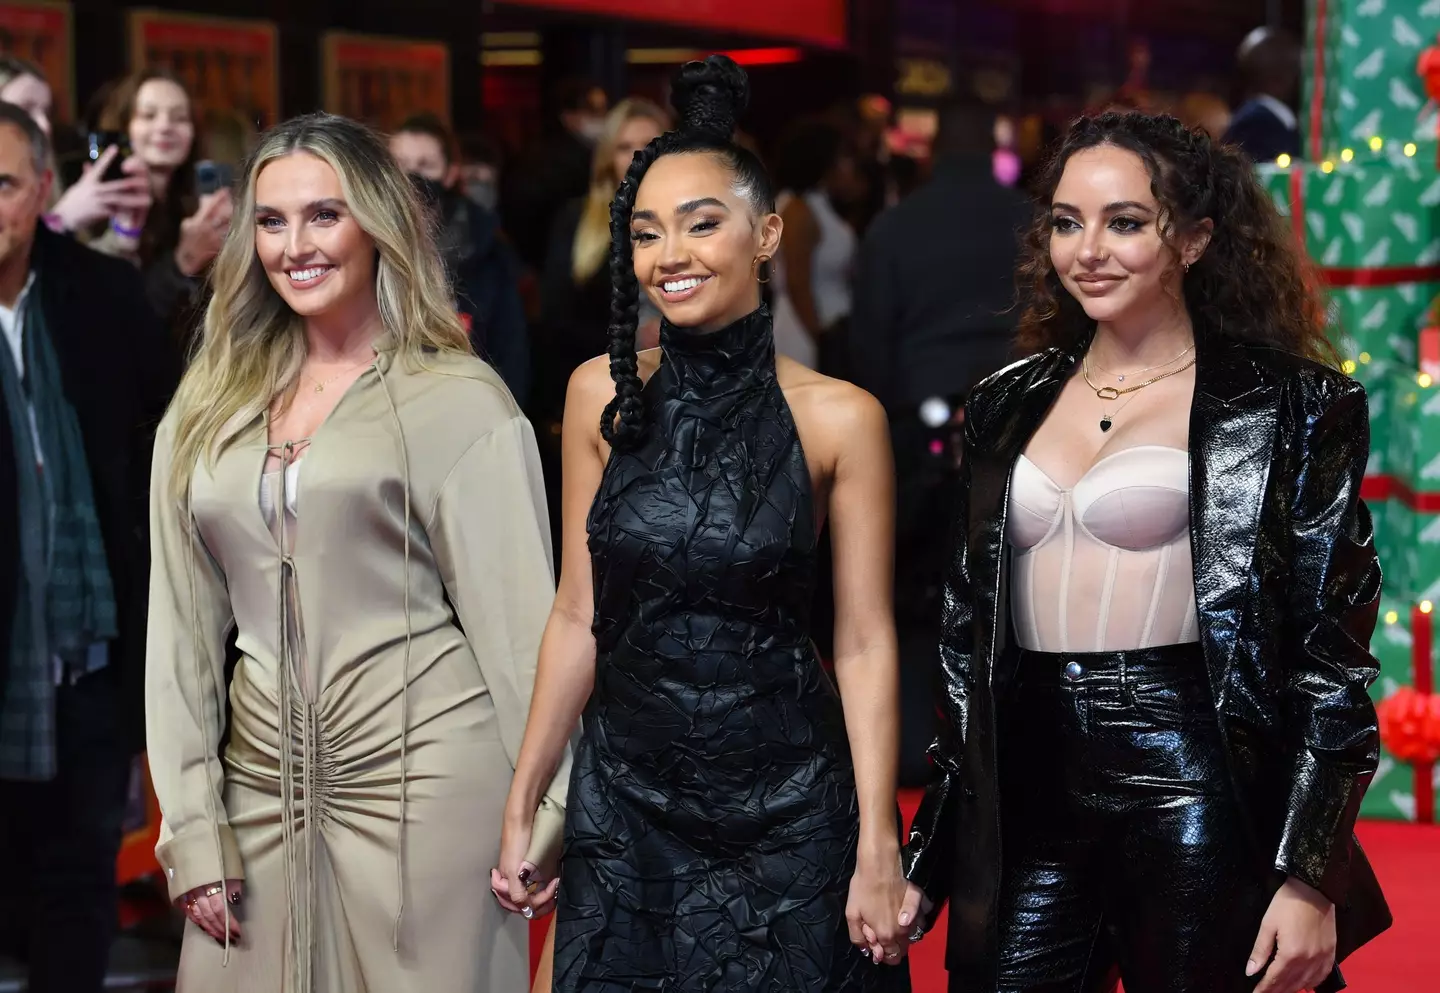 The other members of Little Mix, Perrie Edwards and Jade Thirlwall, came to the Boxing Day premiere to support Leigh-Anne (